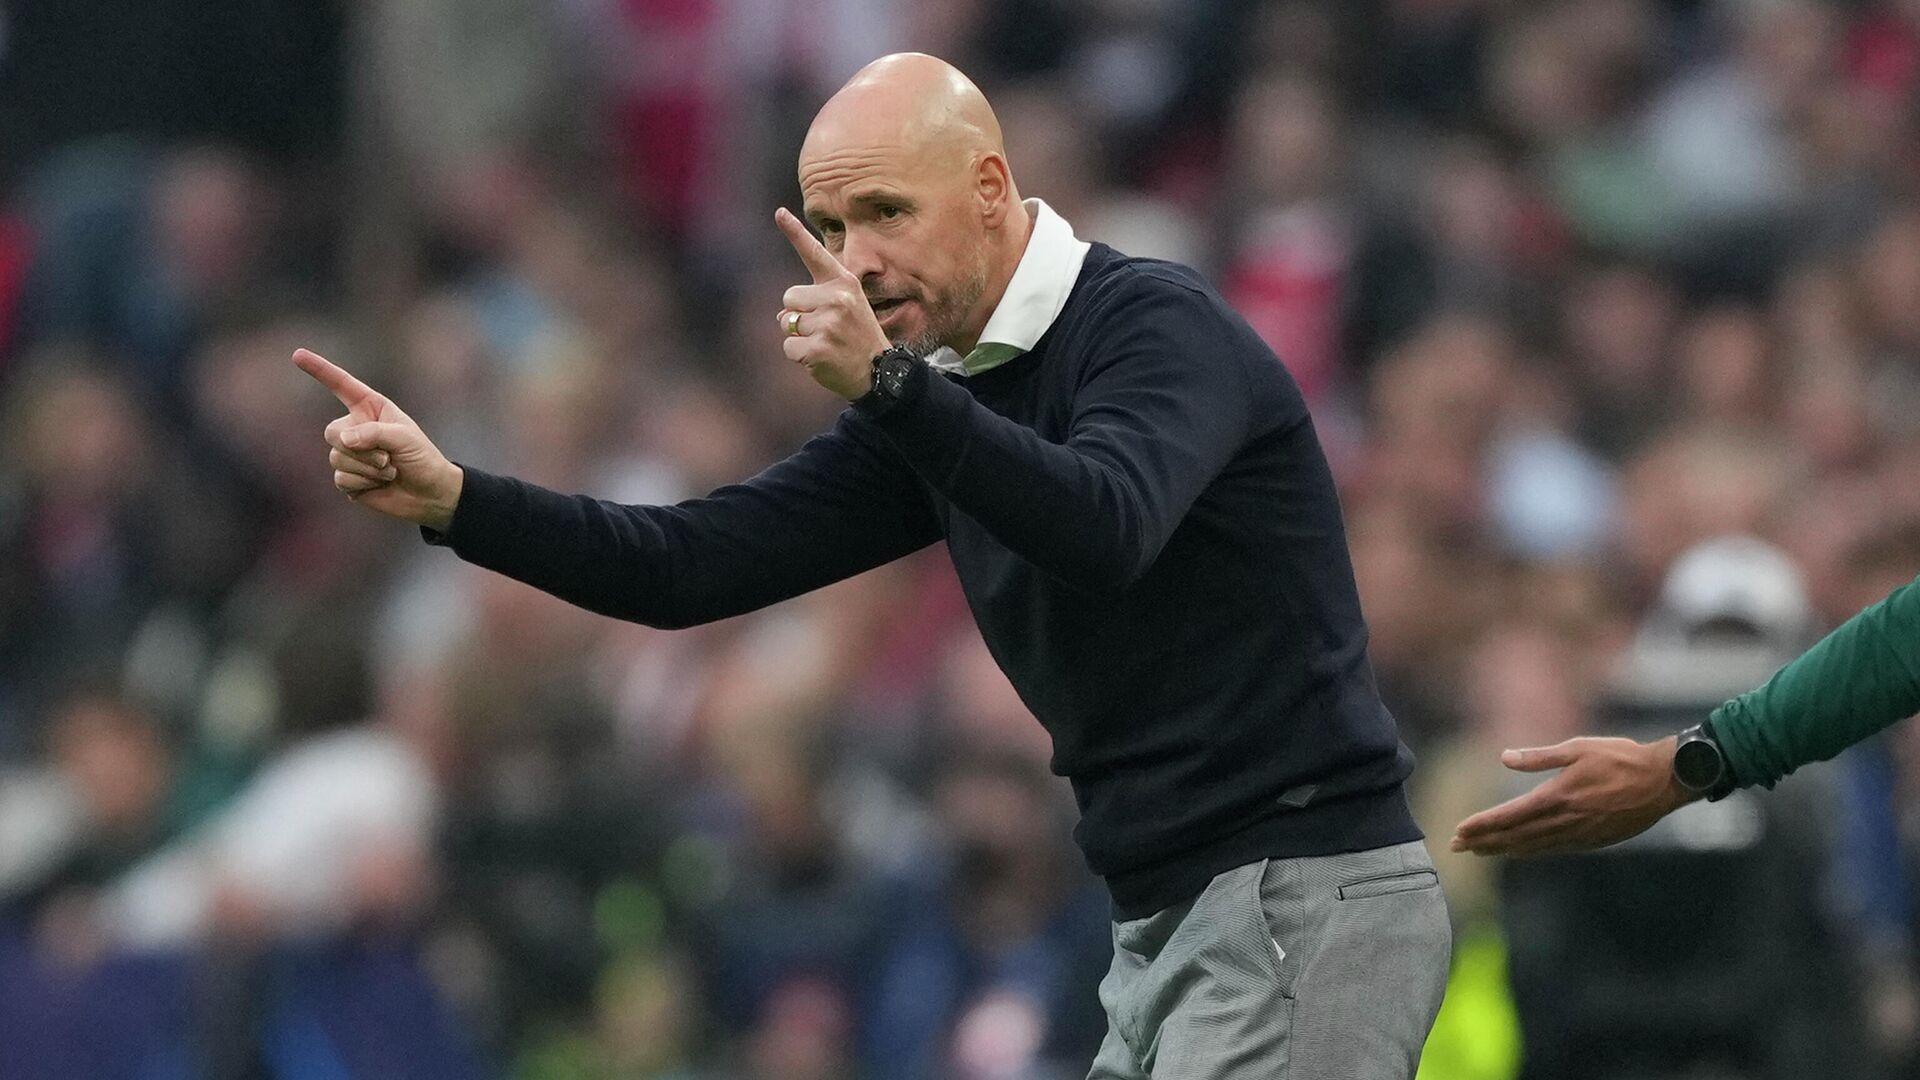 Ajax's head coach Erik ten Hag gives instructions from the side line during the Champions League group C soccer match between Ajax and Besiktas at the Johan Cruyff ArenA in Amsterdam in Amsterdam, Netherlands, Tuesday, Sept. 28, 2021 - Sputnik International, 1920, 16.03.2022